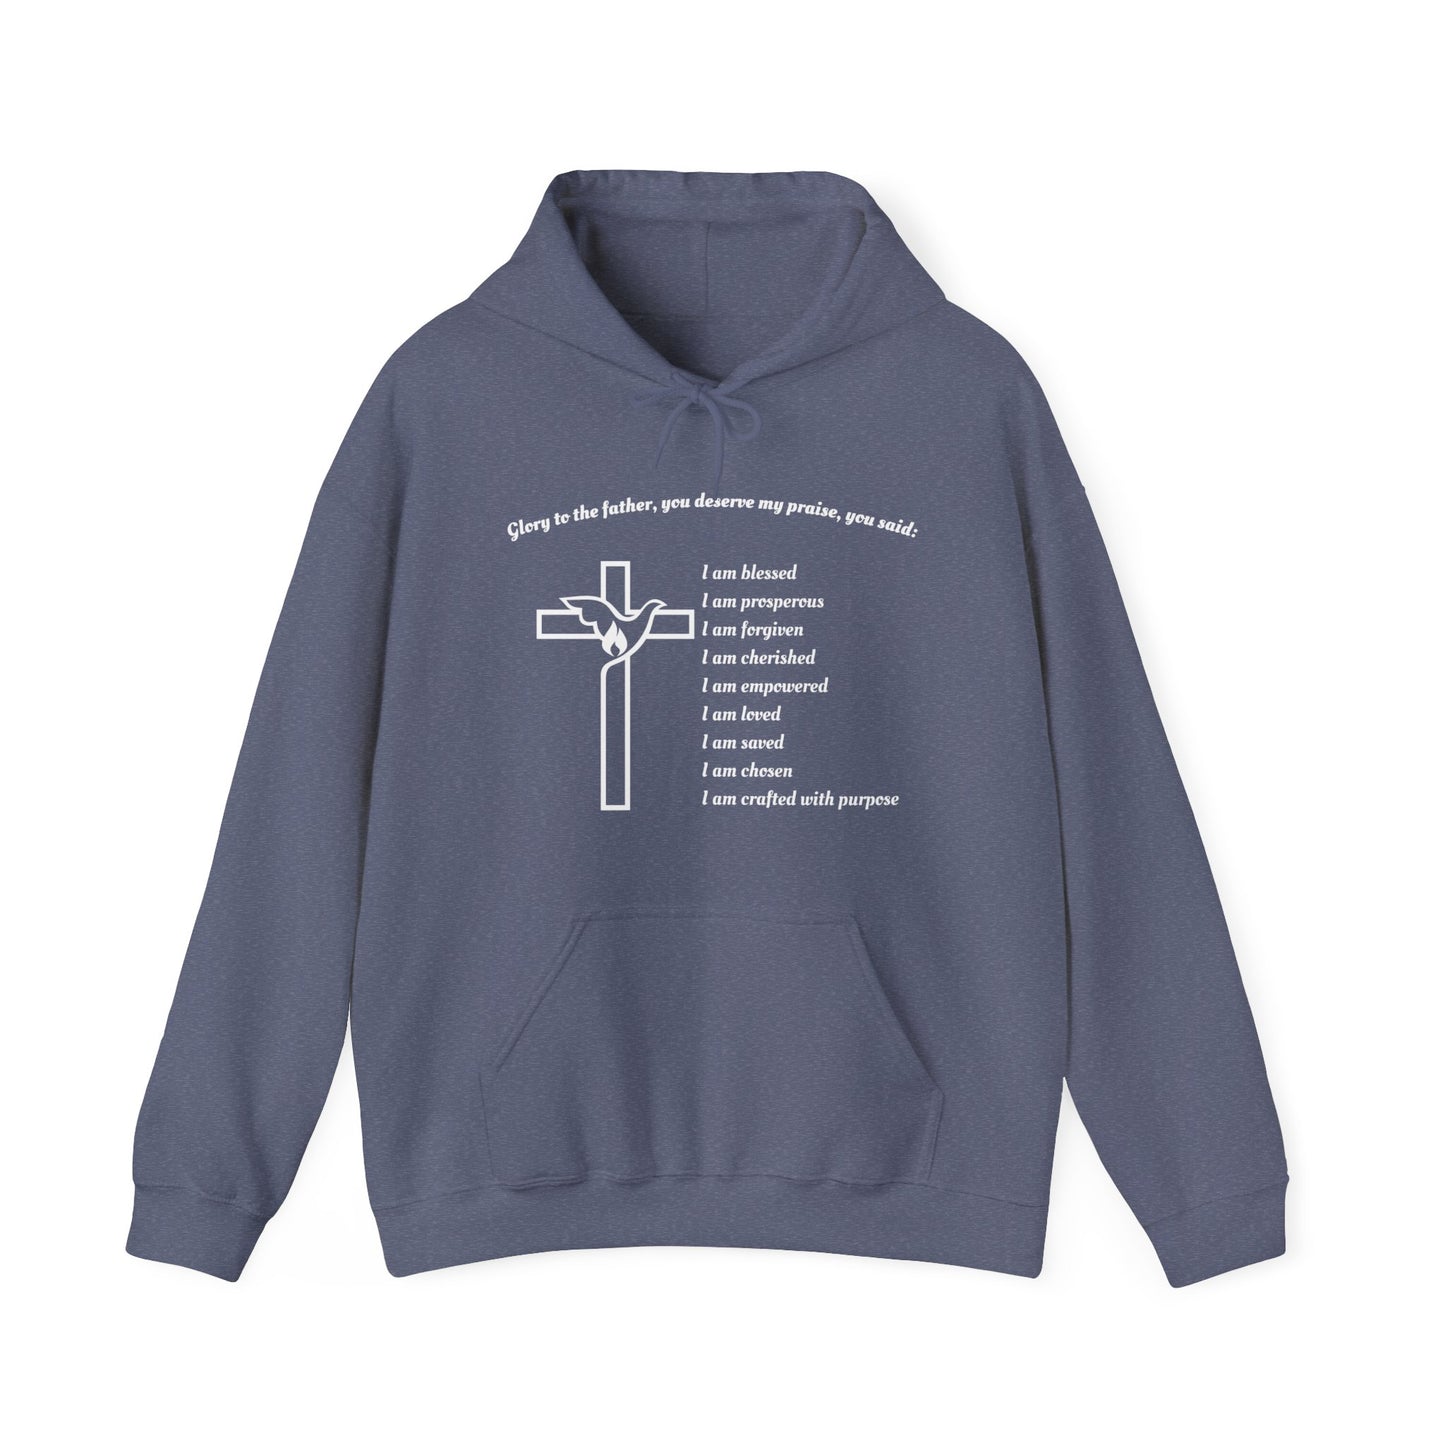 I am Glory to the Father Hooded Sweatshirt Unisex Cozy Heavy Blend54